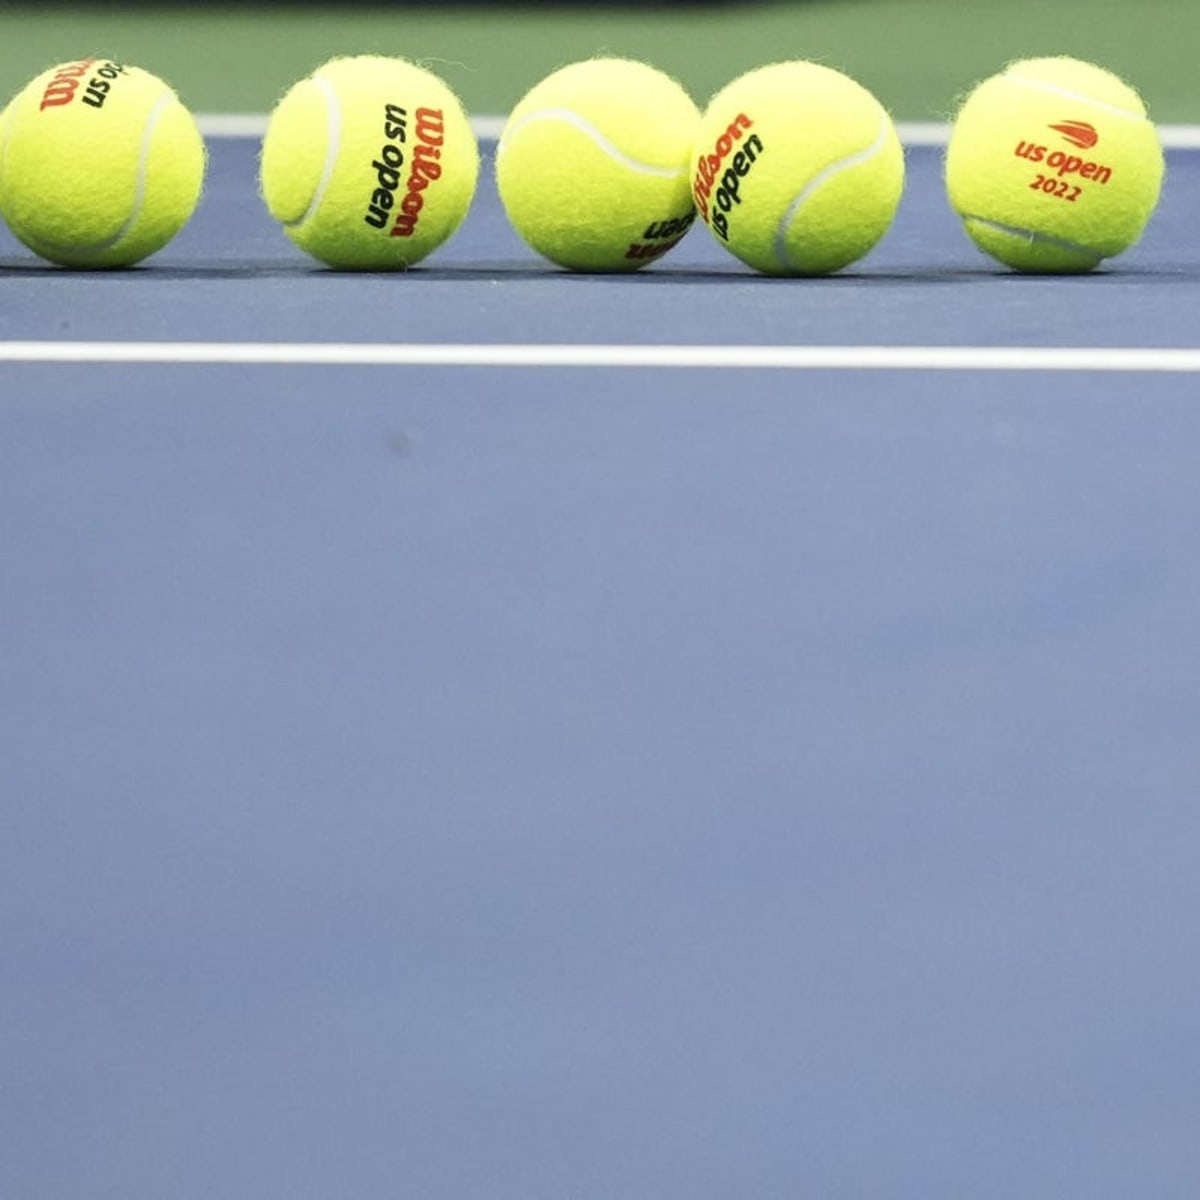 Watch Miami Open ATP semifinal, WTA doubles semifinal Stream tennis live - How to Watch and Stream Major League and College Sports